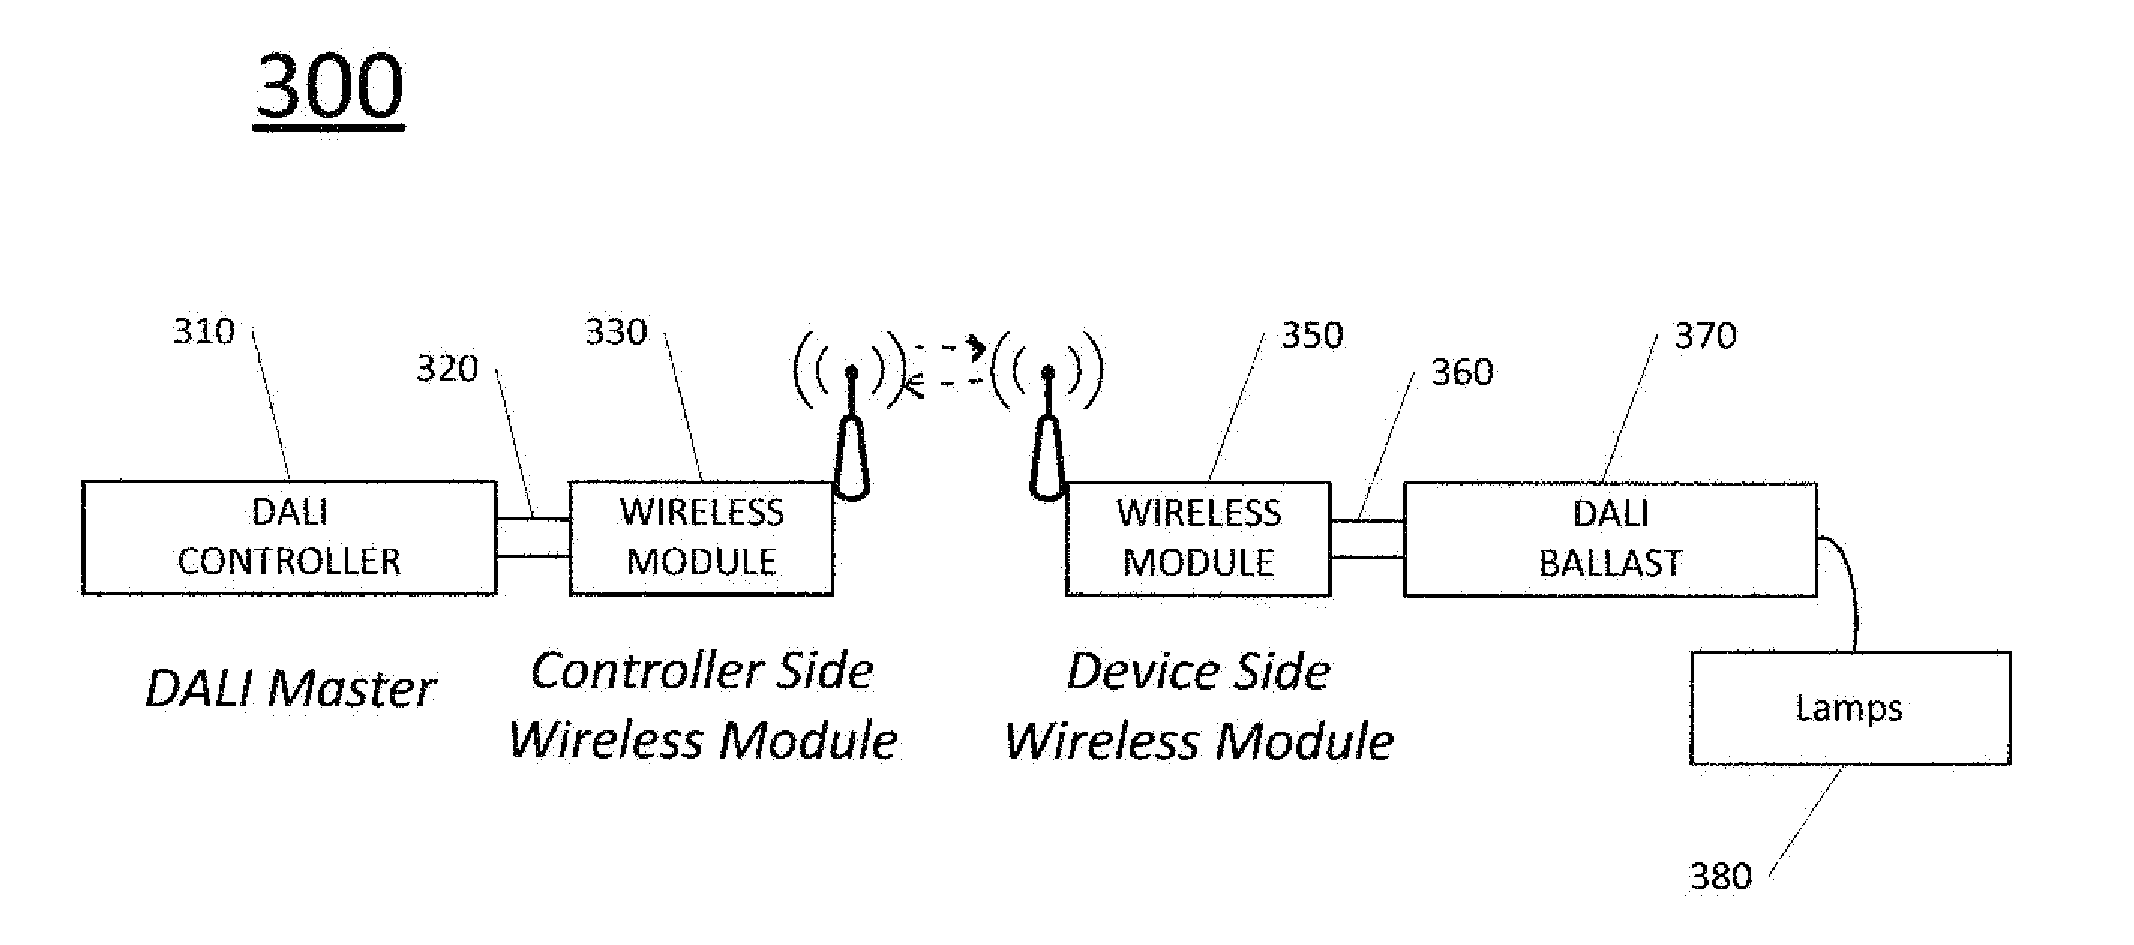 Encapsulation of DALI Commands in Wireless Networks